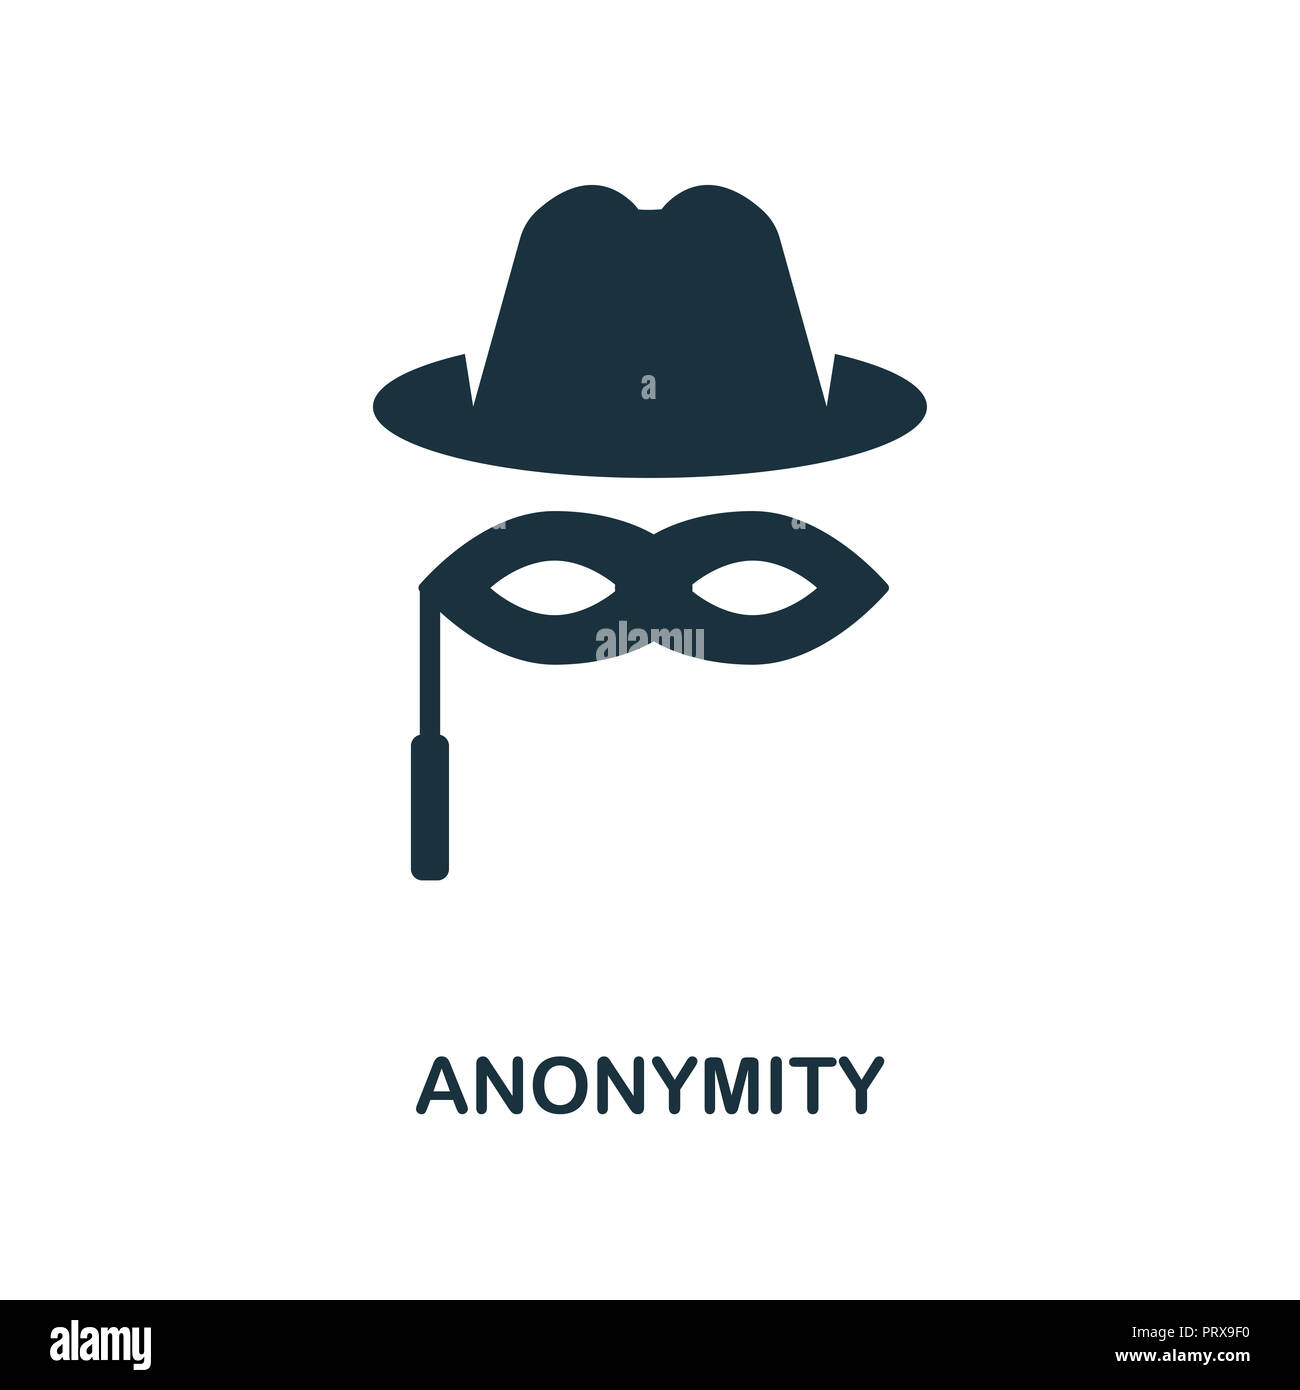 Anonymity icon. Monochrome style design from blockchain collection. UX and UI. Pixel perfect anonymity icon. For web design, apps, software, printing  Stock Photo